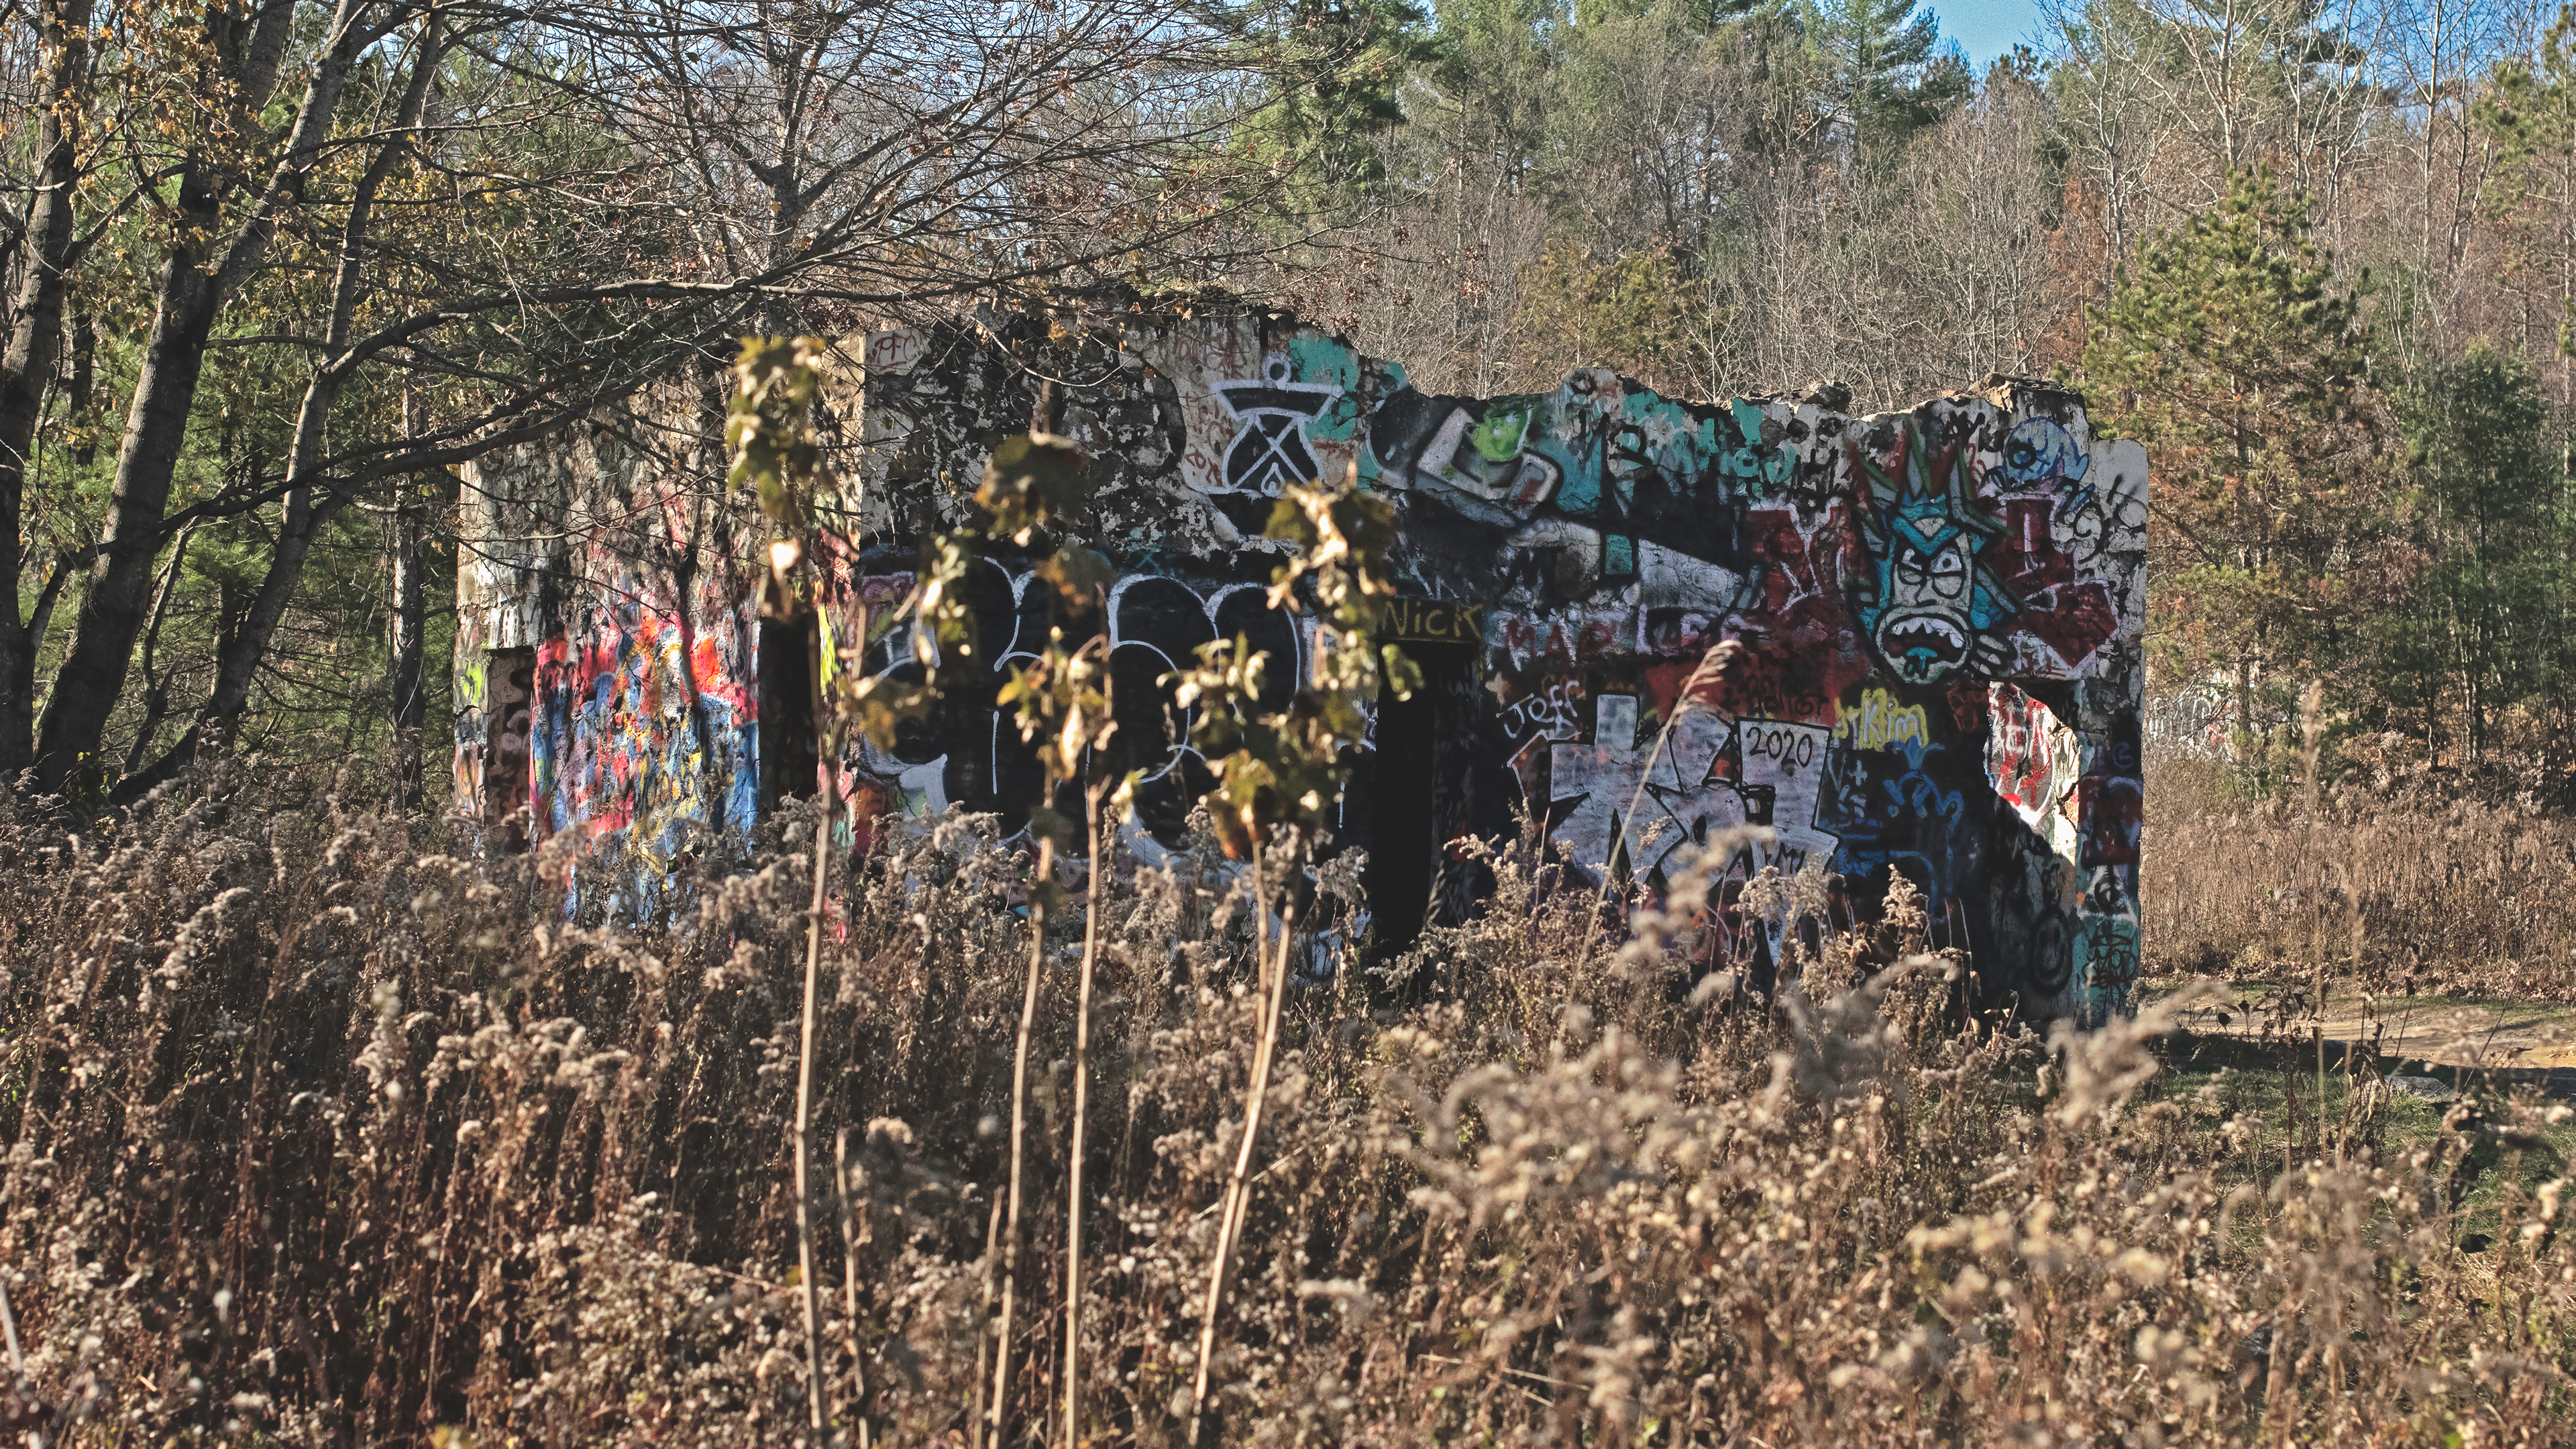 General 3840x2160 abandoned urbex graffiti Rick and Morty outdoors plants trees